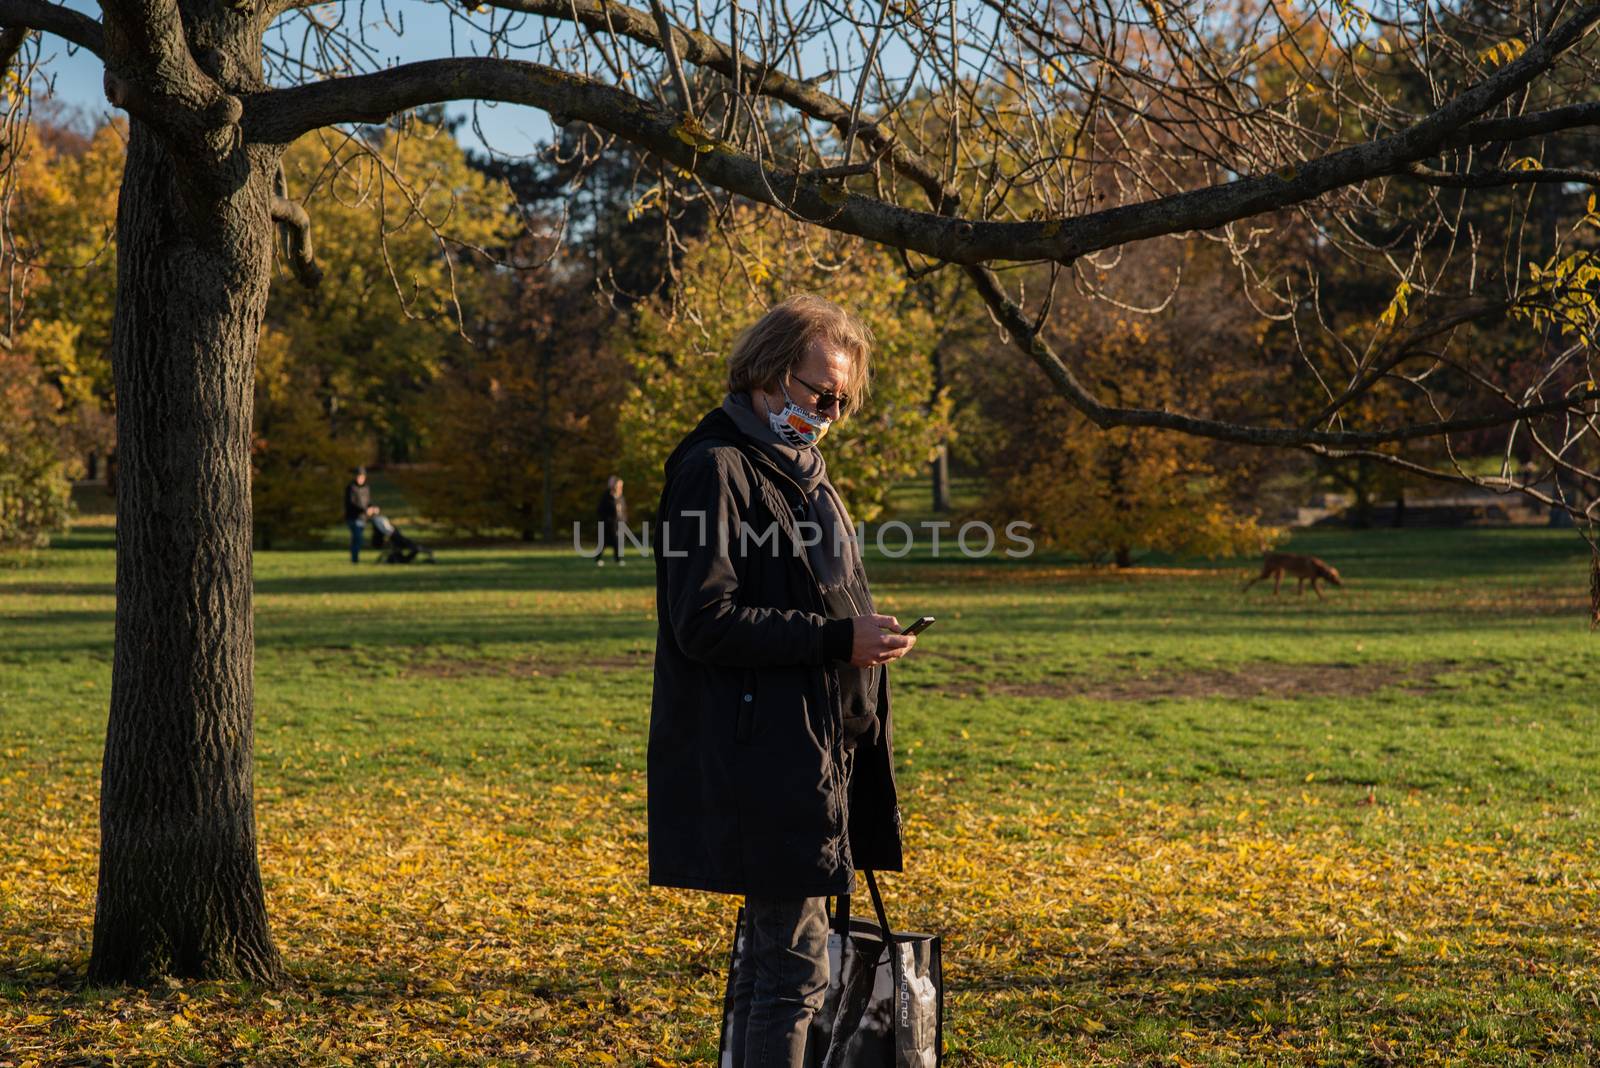 11/14/2020. Park Stromovka. Prague czech Republic. A man is checking his phone in the park on a Sunday winter day. by gonzalobell